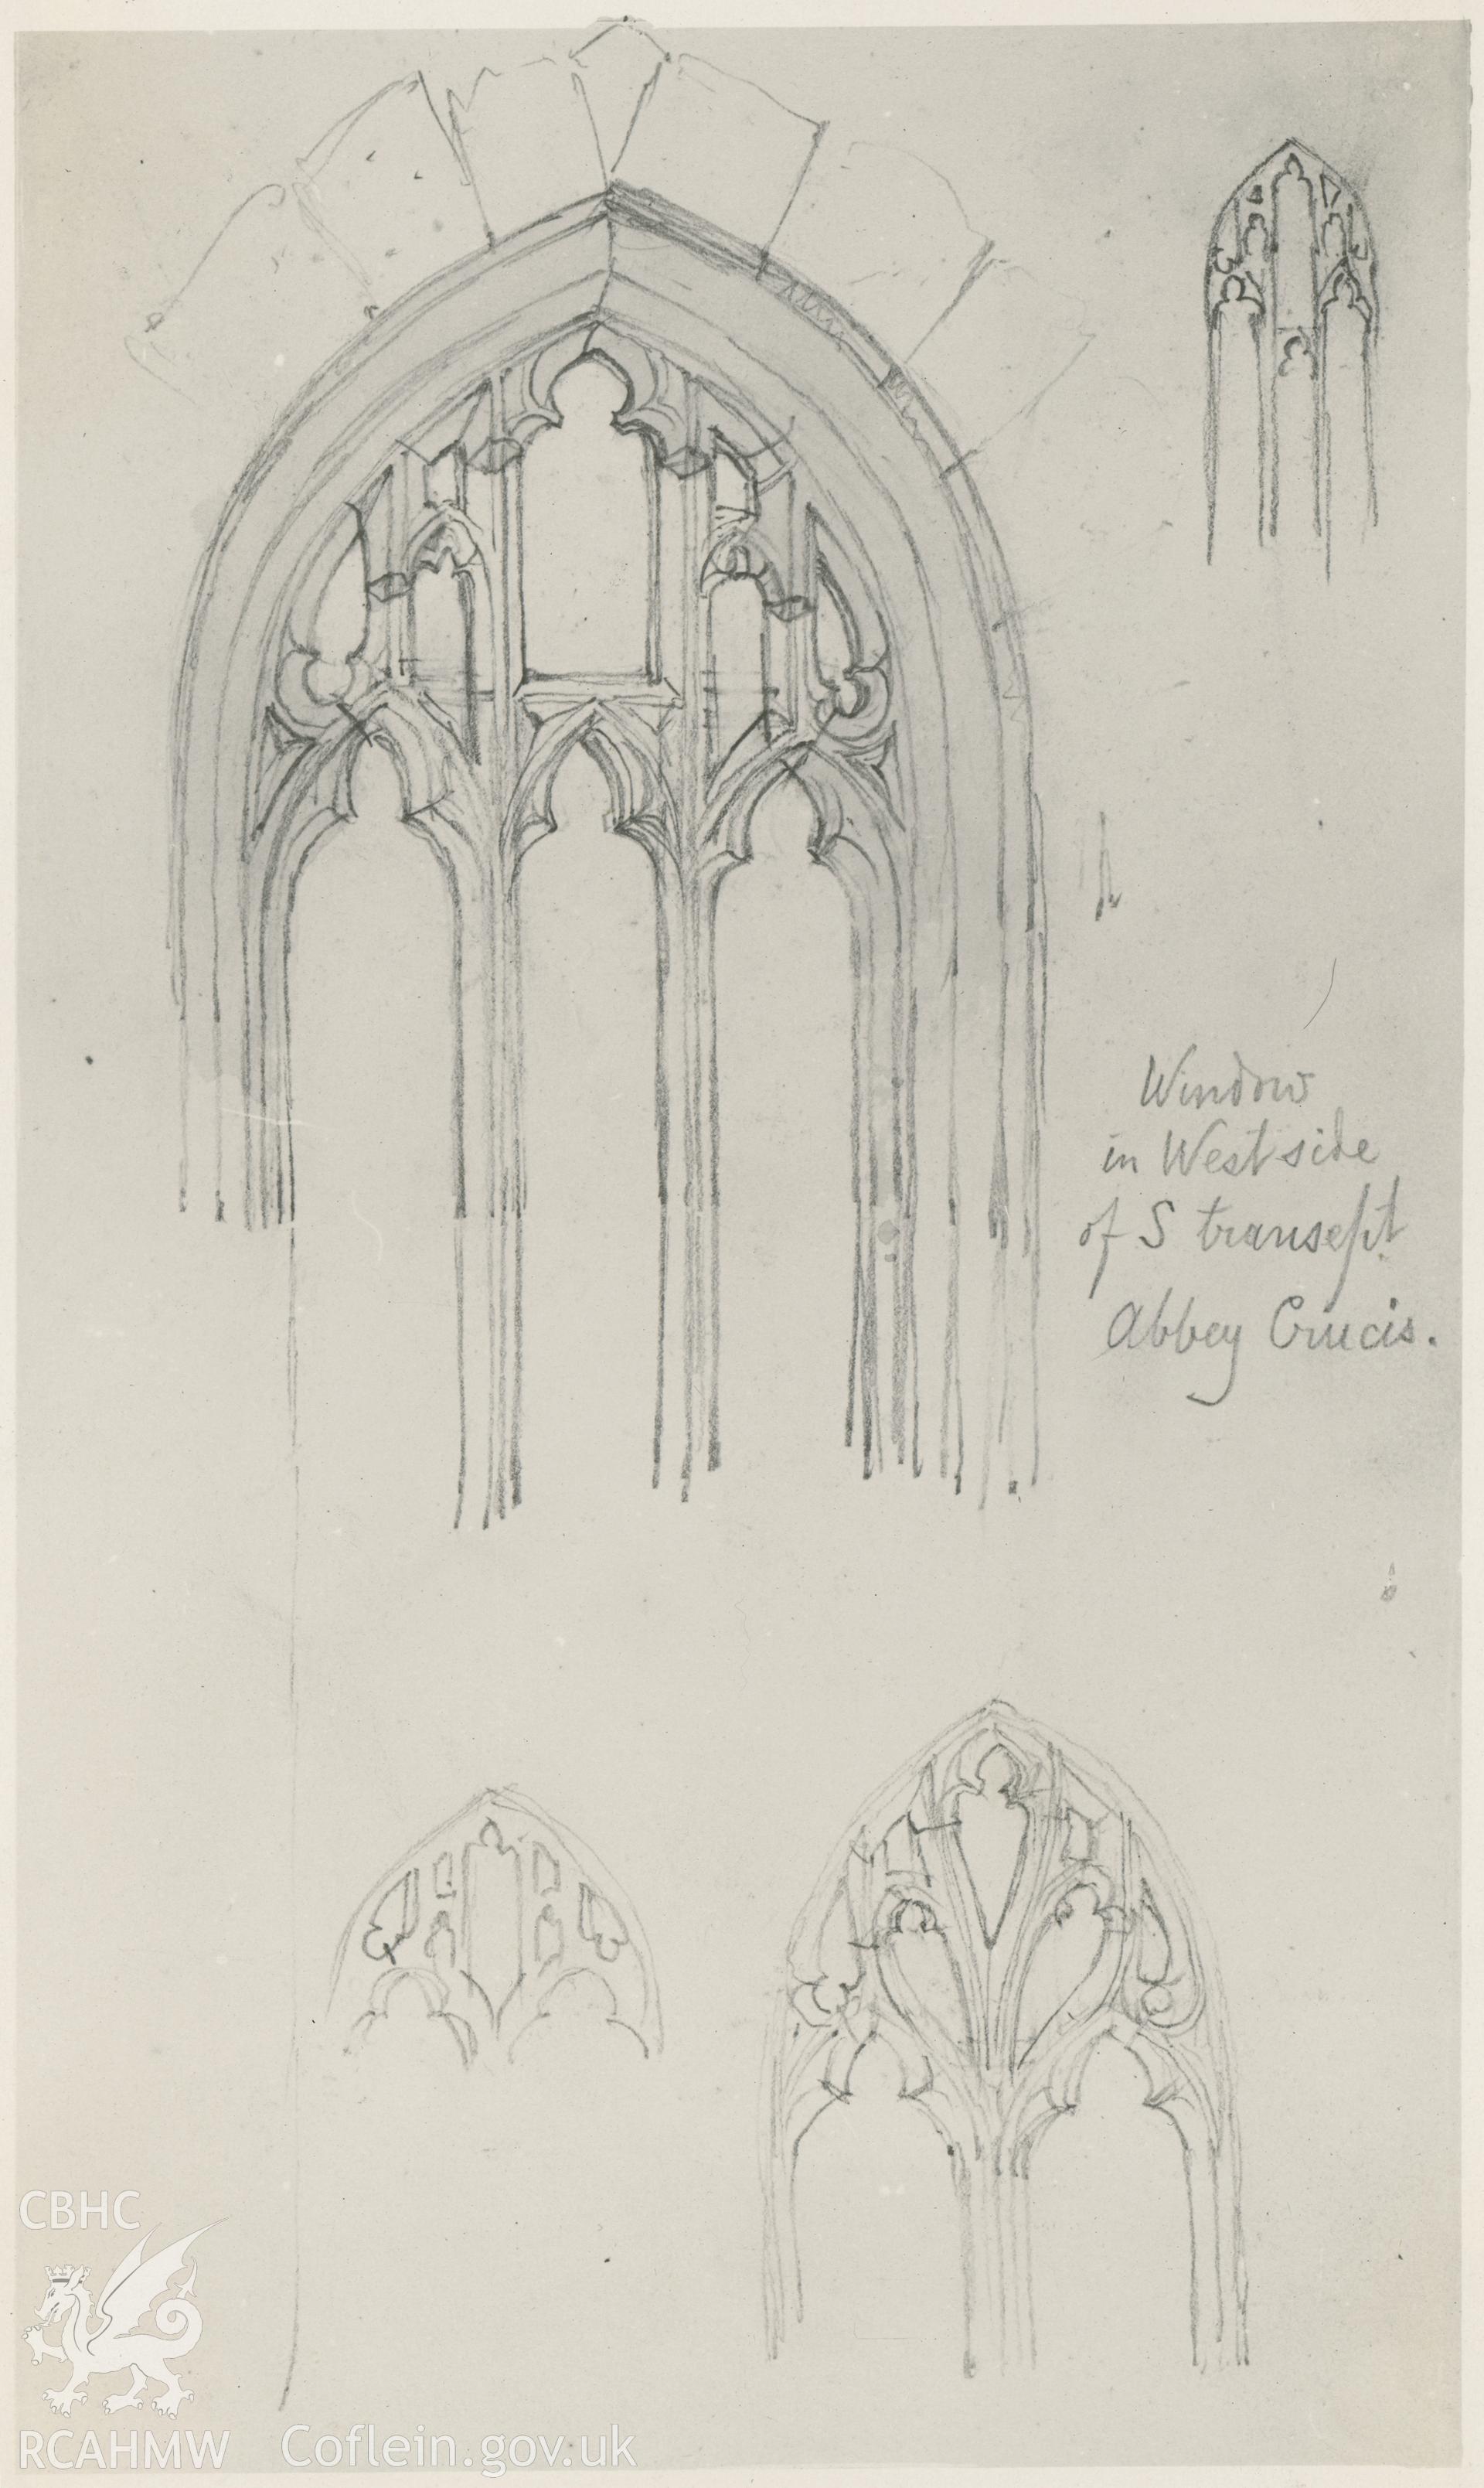 Photograph by Macbeth of an early pencil sketch showing windows in the west side of Valle Crucis Abbey.